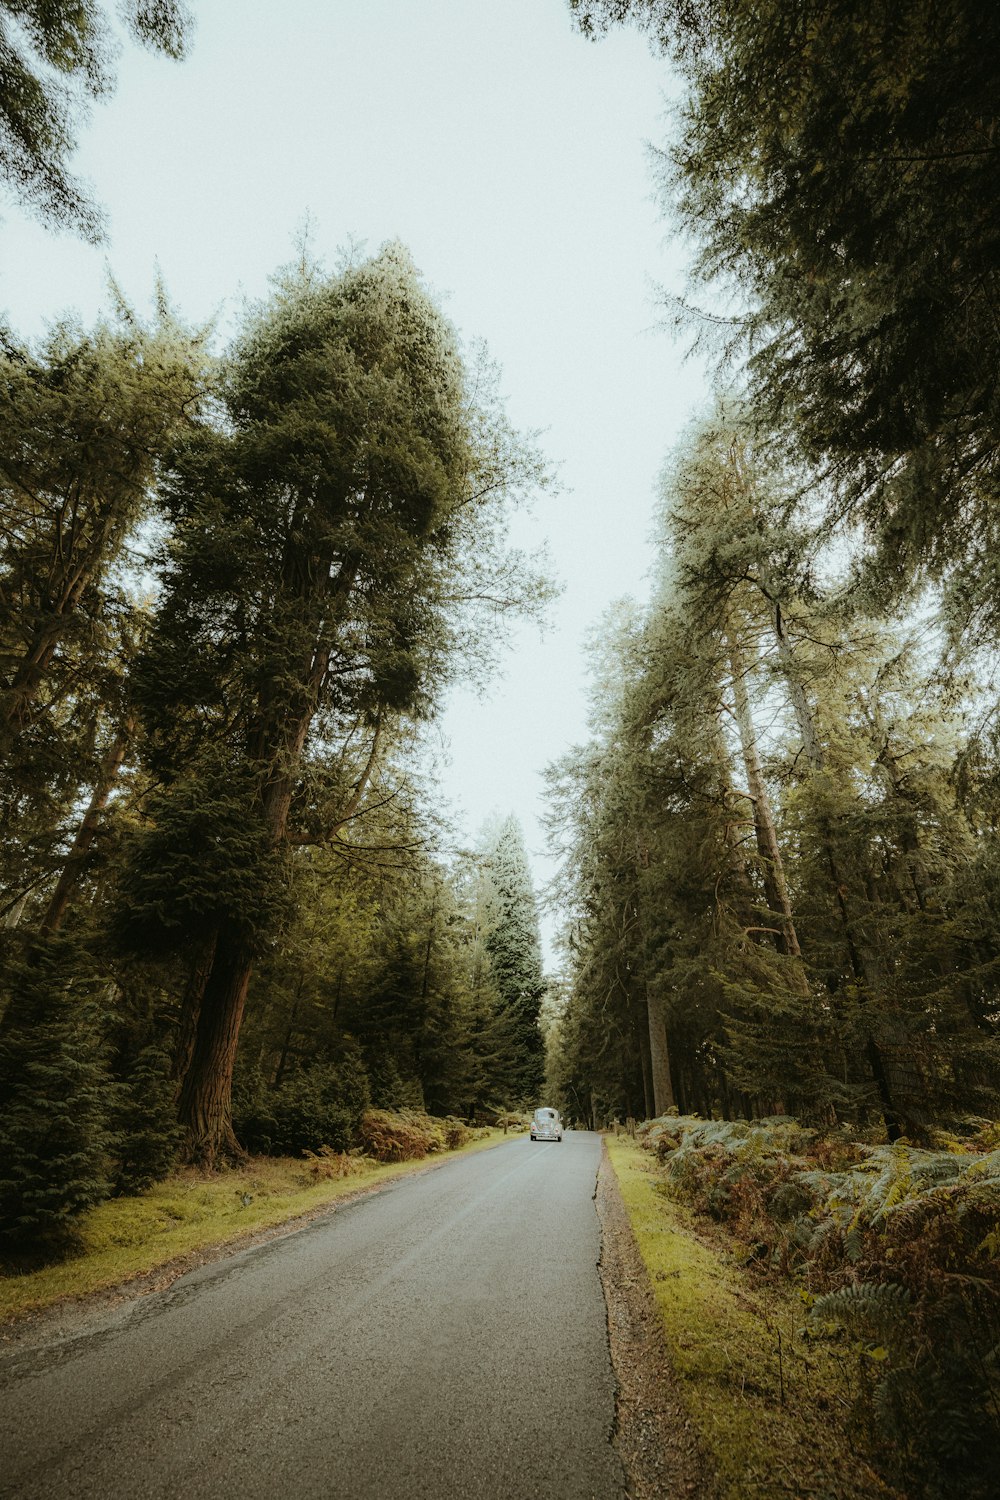 a car driving down a road surrounded by tall trees